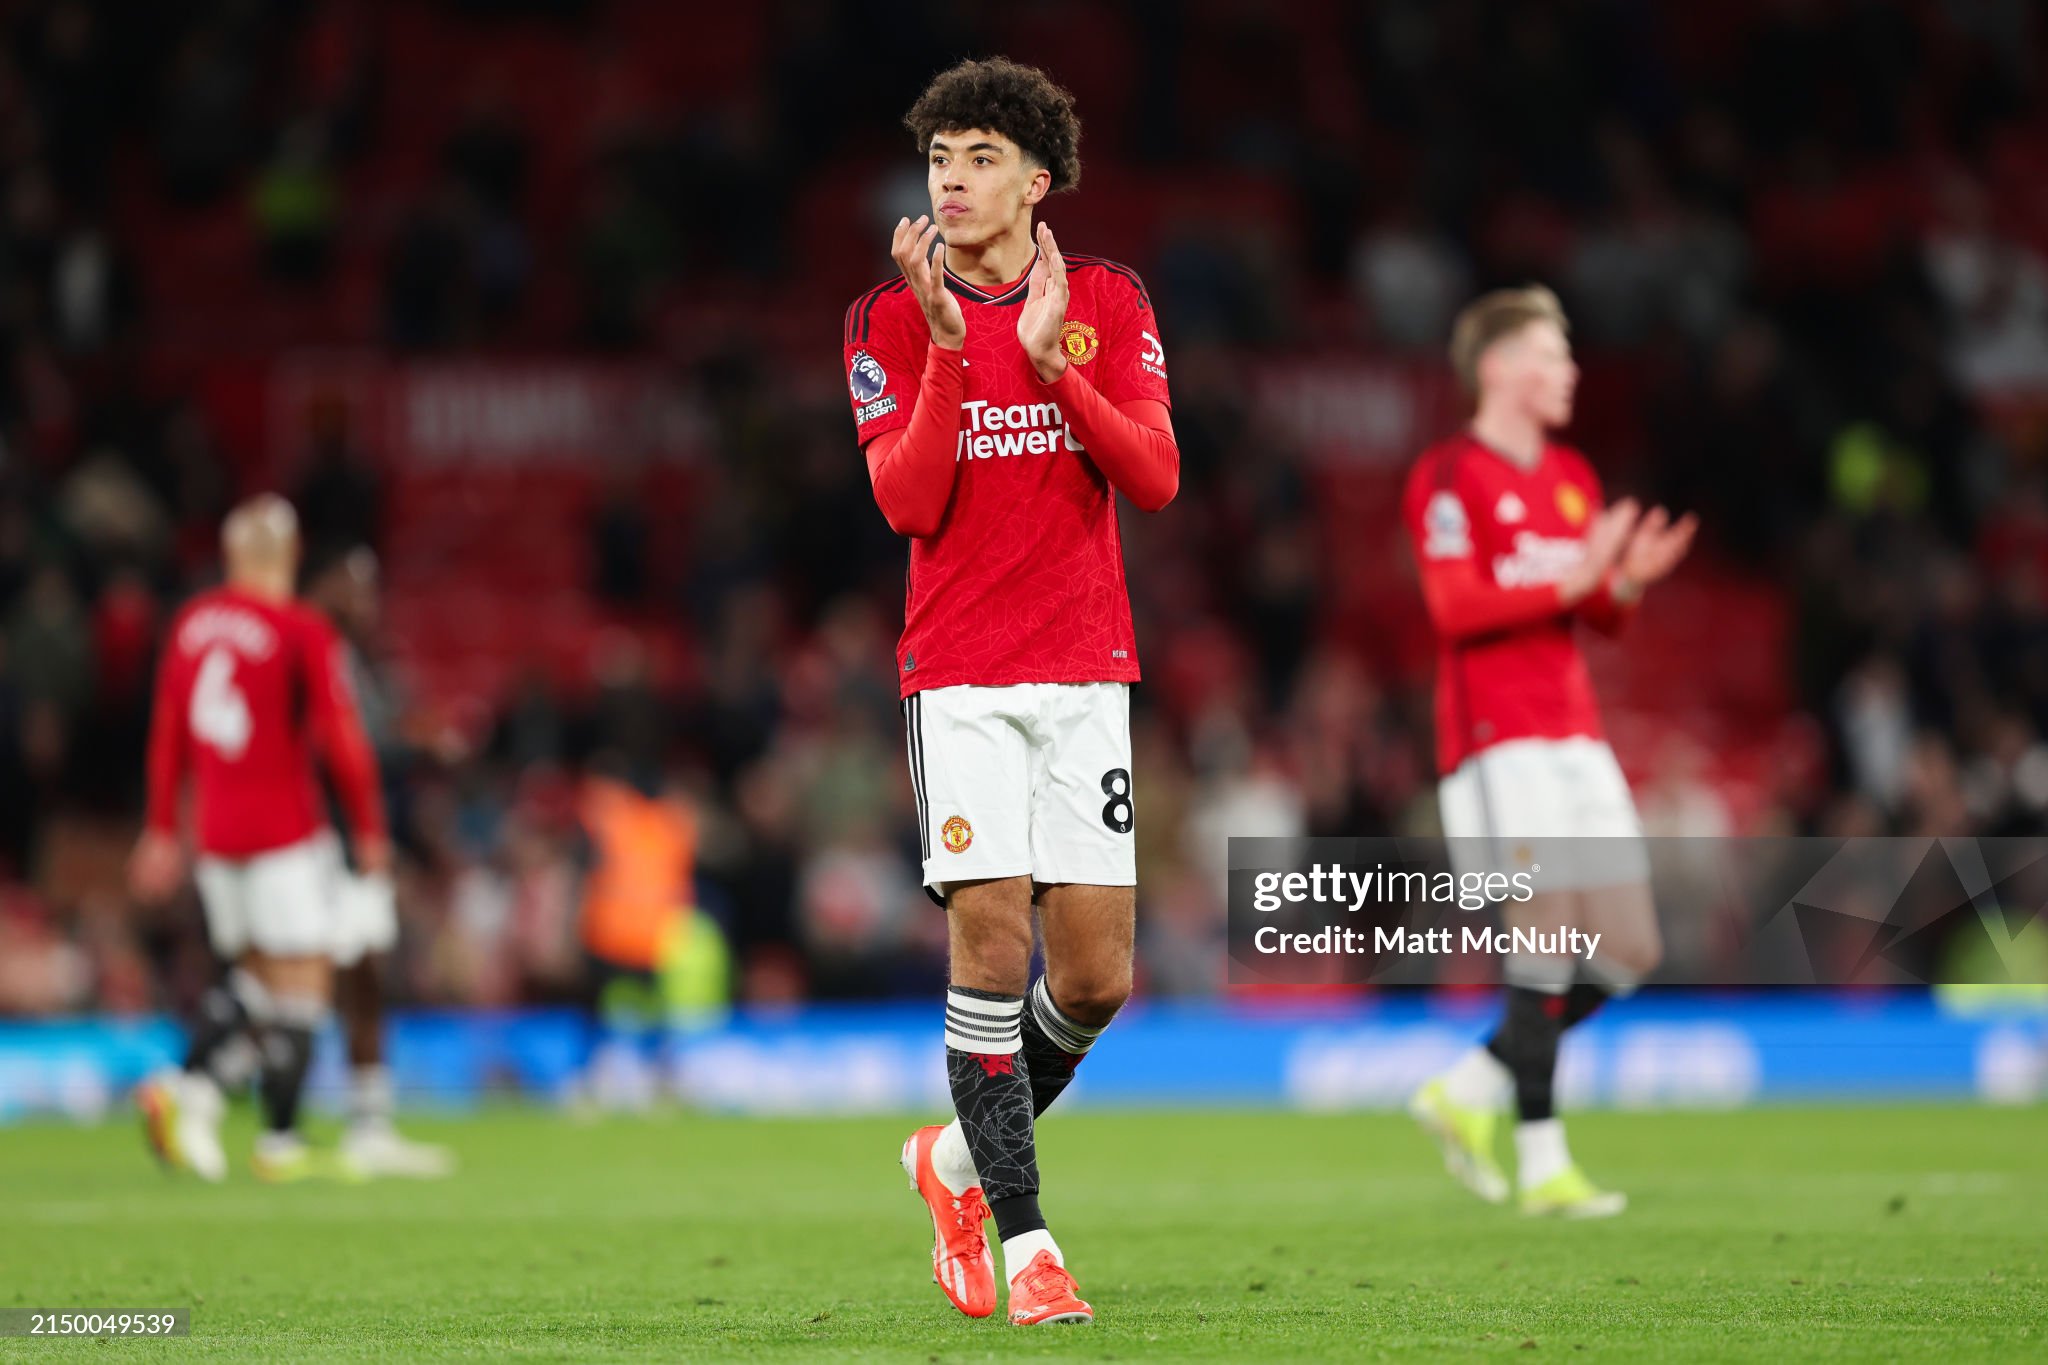 Ten Hag achieves a special milestone at Manchester United with a debutant